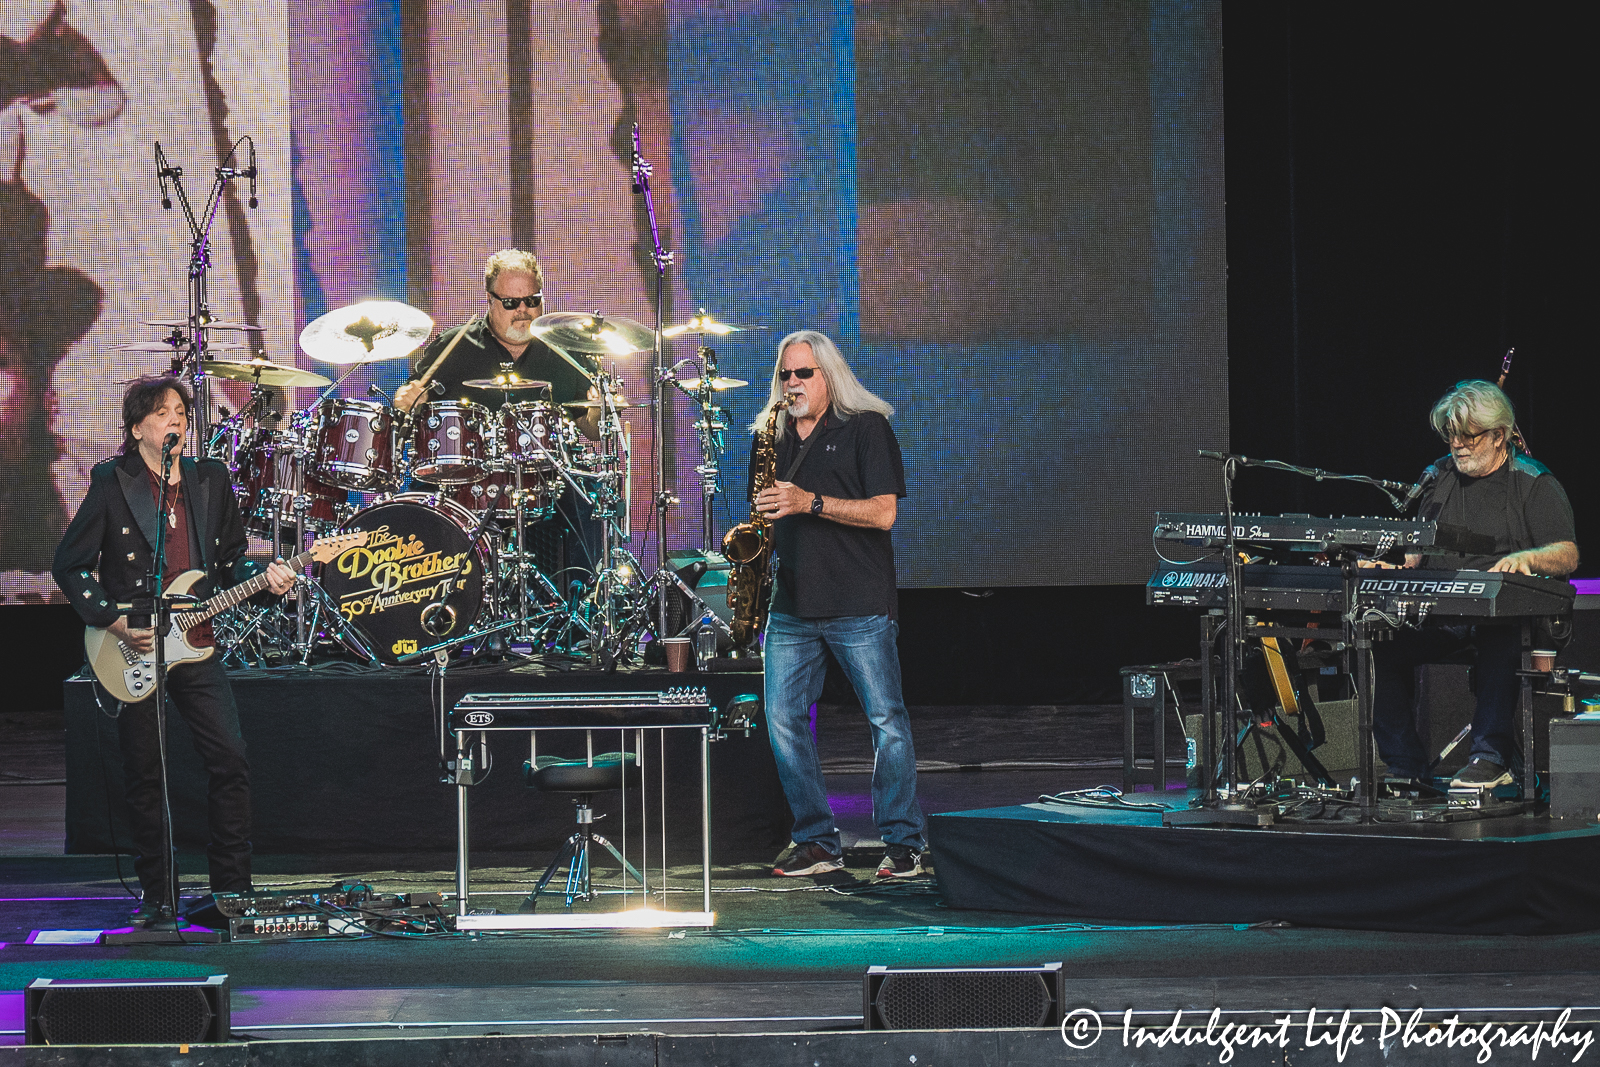 Founding member John McFee of The Doobie Brothers and classic member Michael McDonald alongside touring members Marc Russo on saxophone and Ed Toth on drums at Starlight Theatre in Kansas City, MO on June 14, 2023.